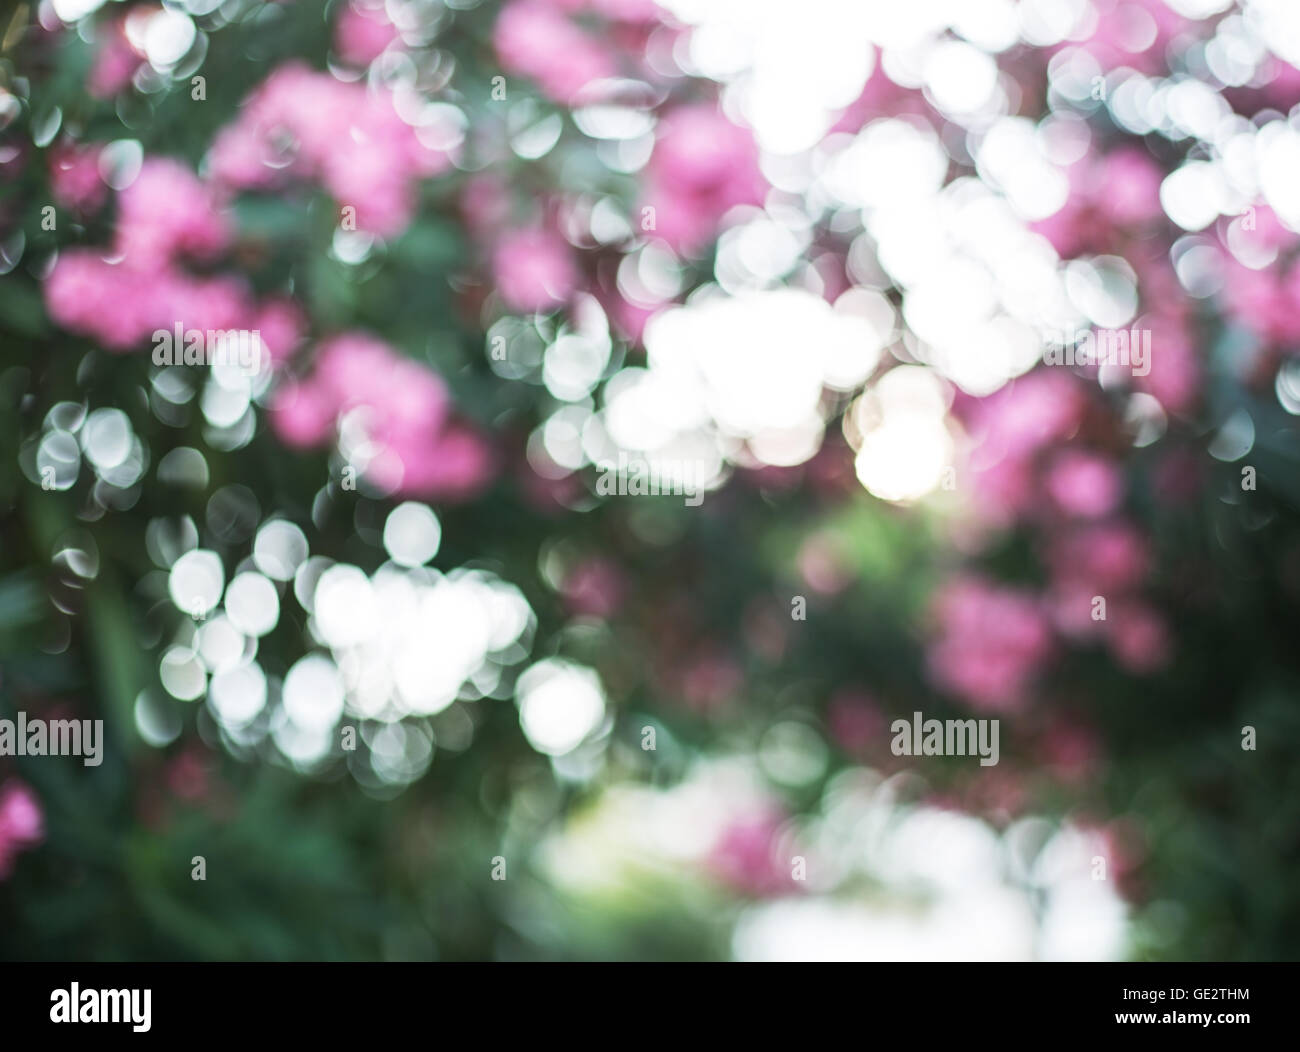 Blurred natural background. Blooming oleander shrub. Stock Photo